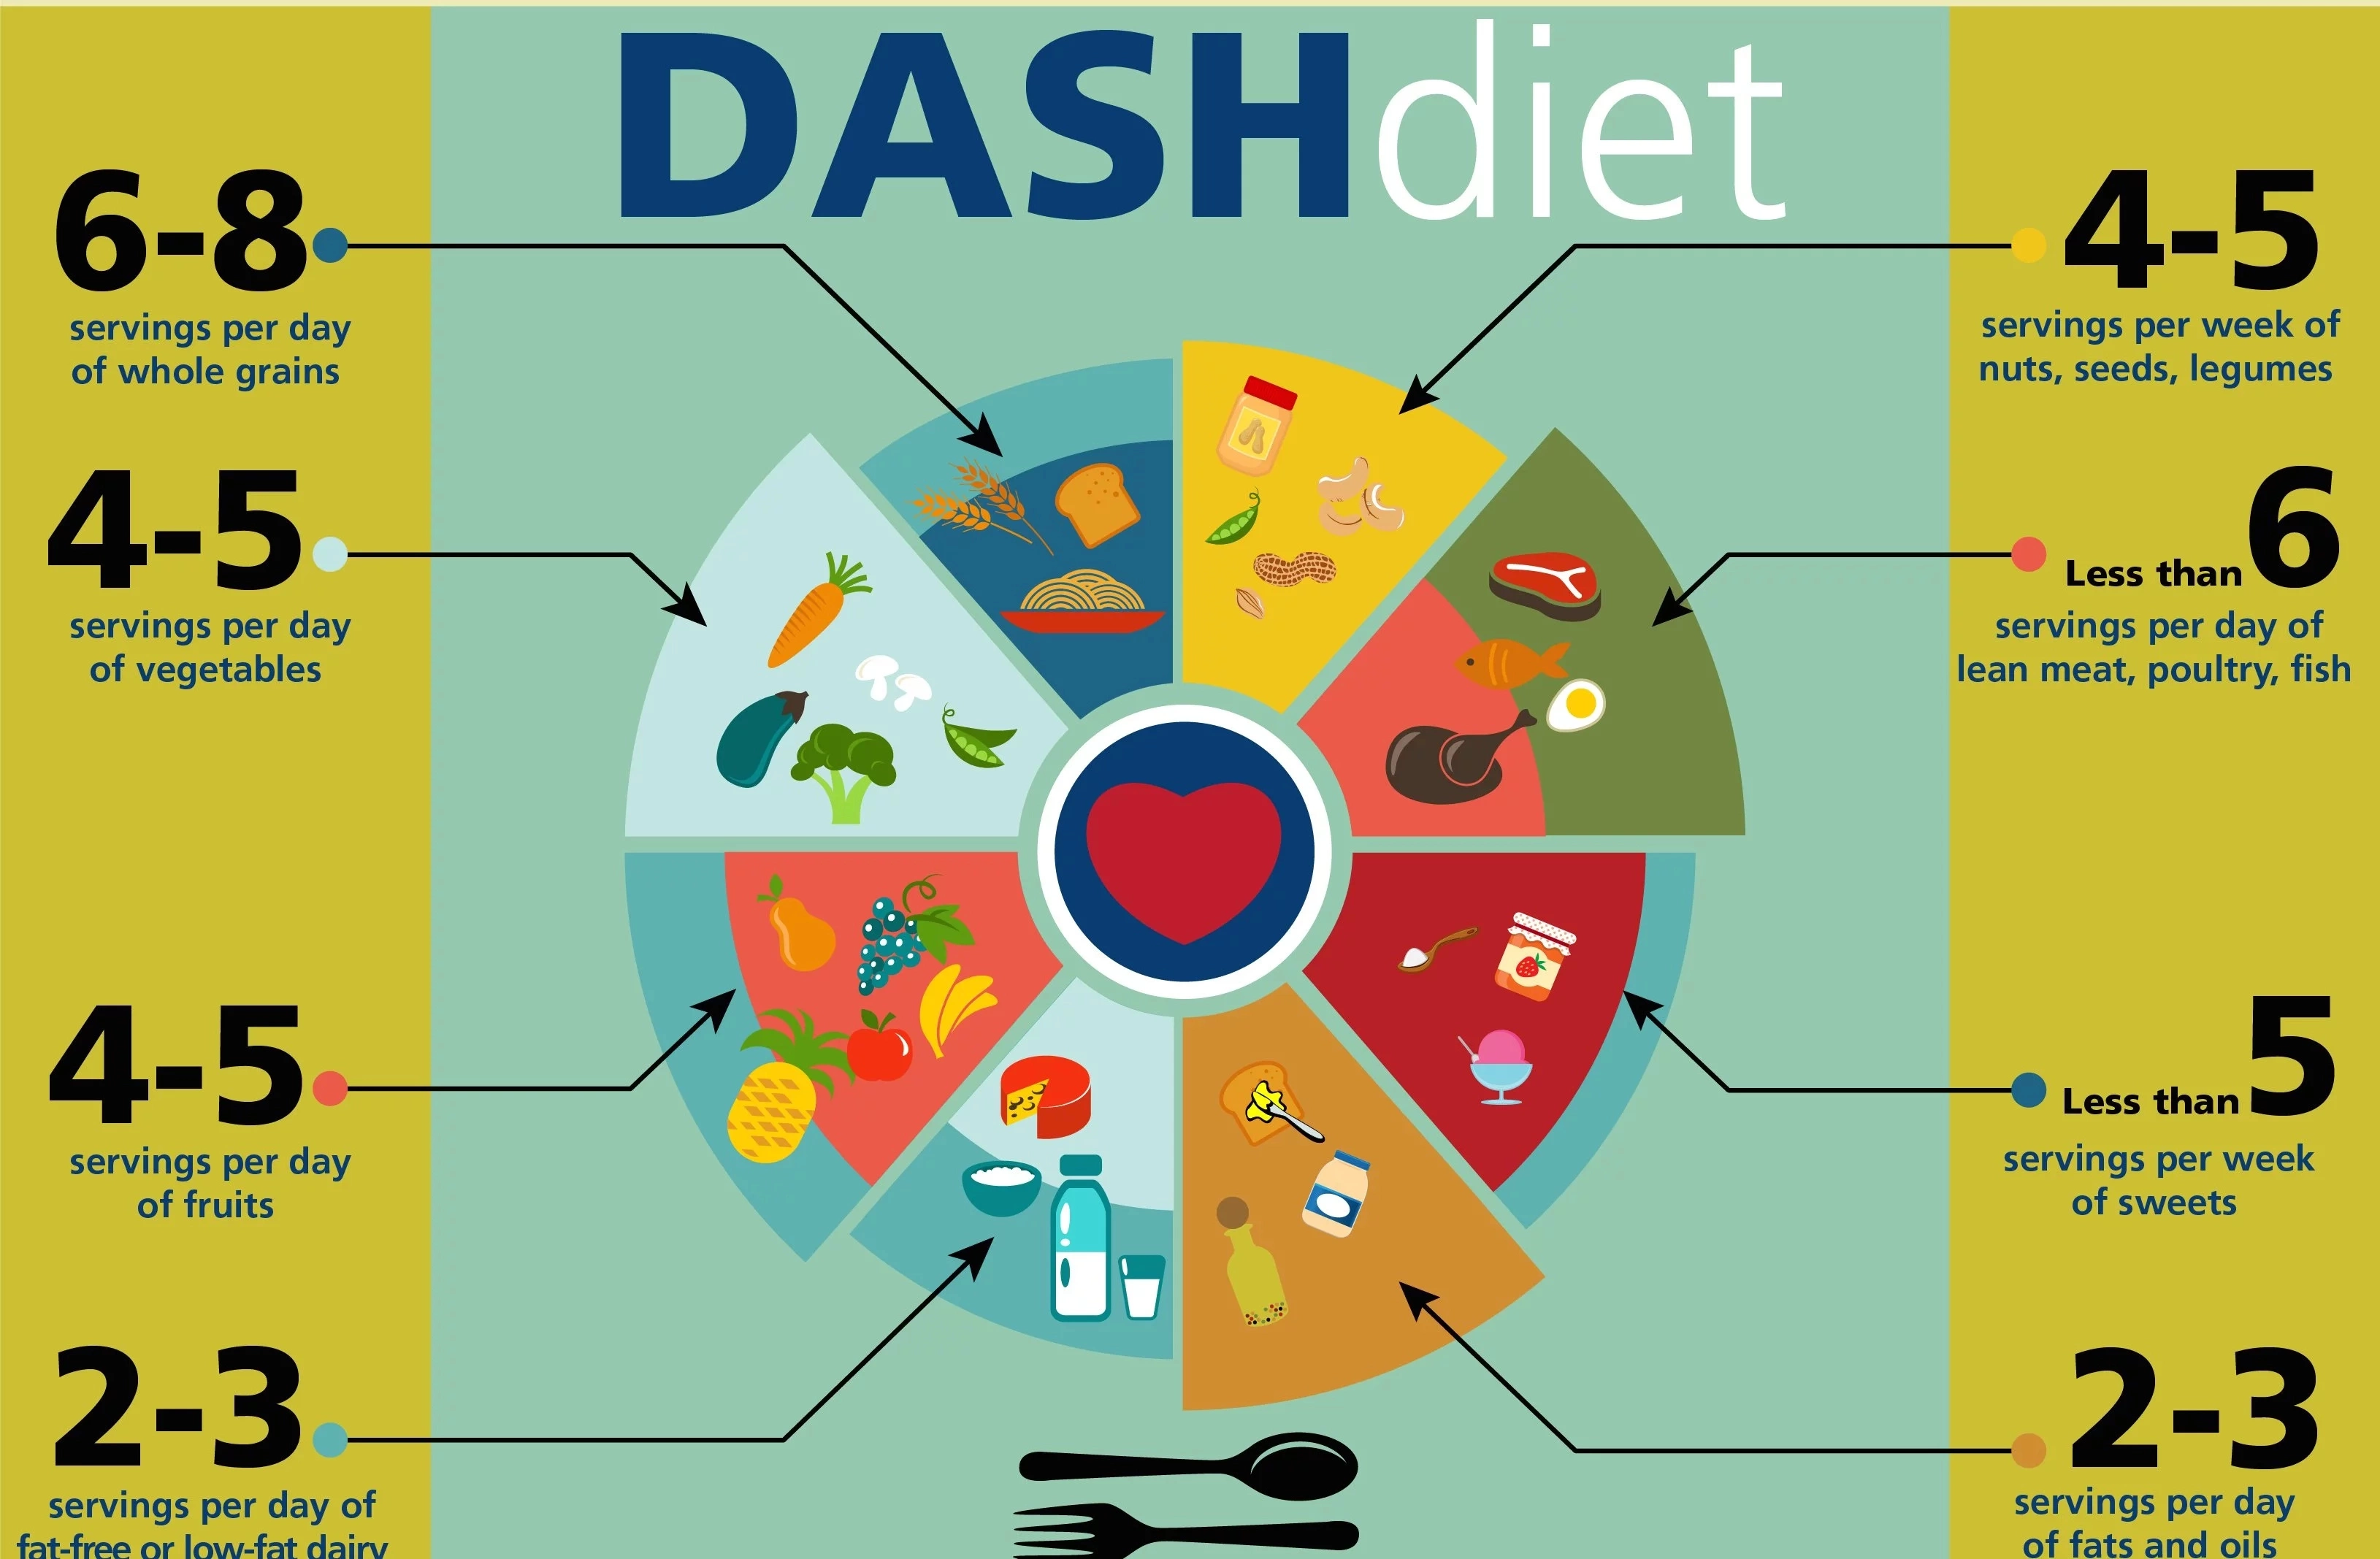 Use the DASH Diet to Easily Lower Your Blood Pressure